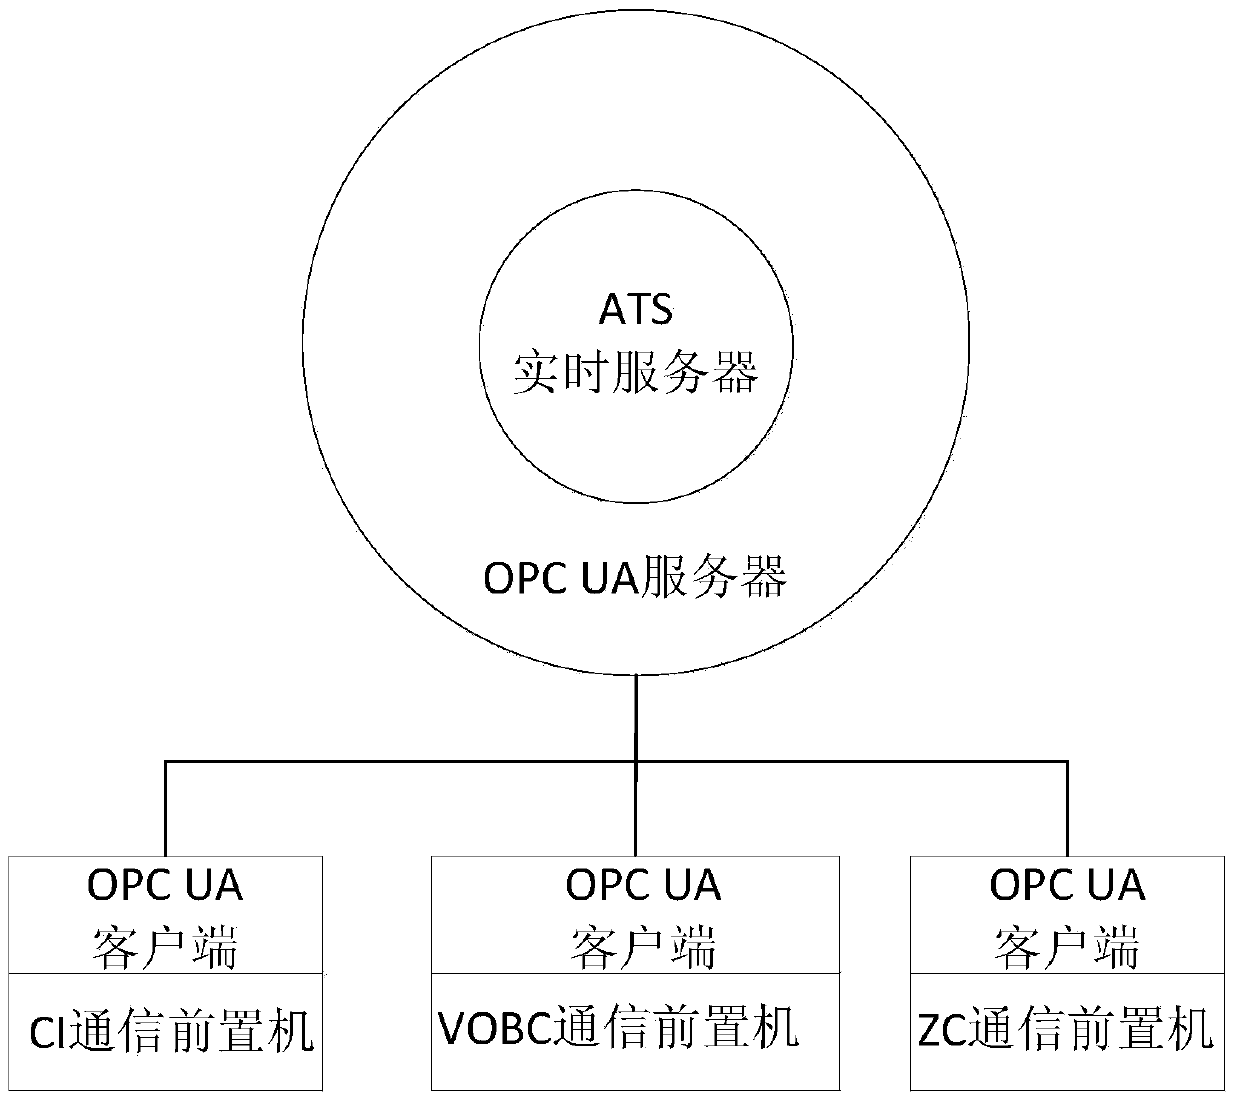 ATS device and system based on OPC UA technology